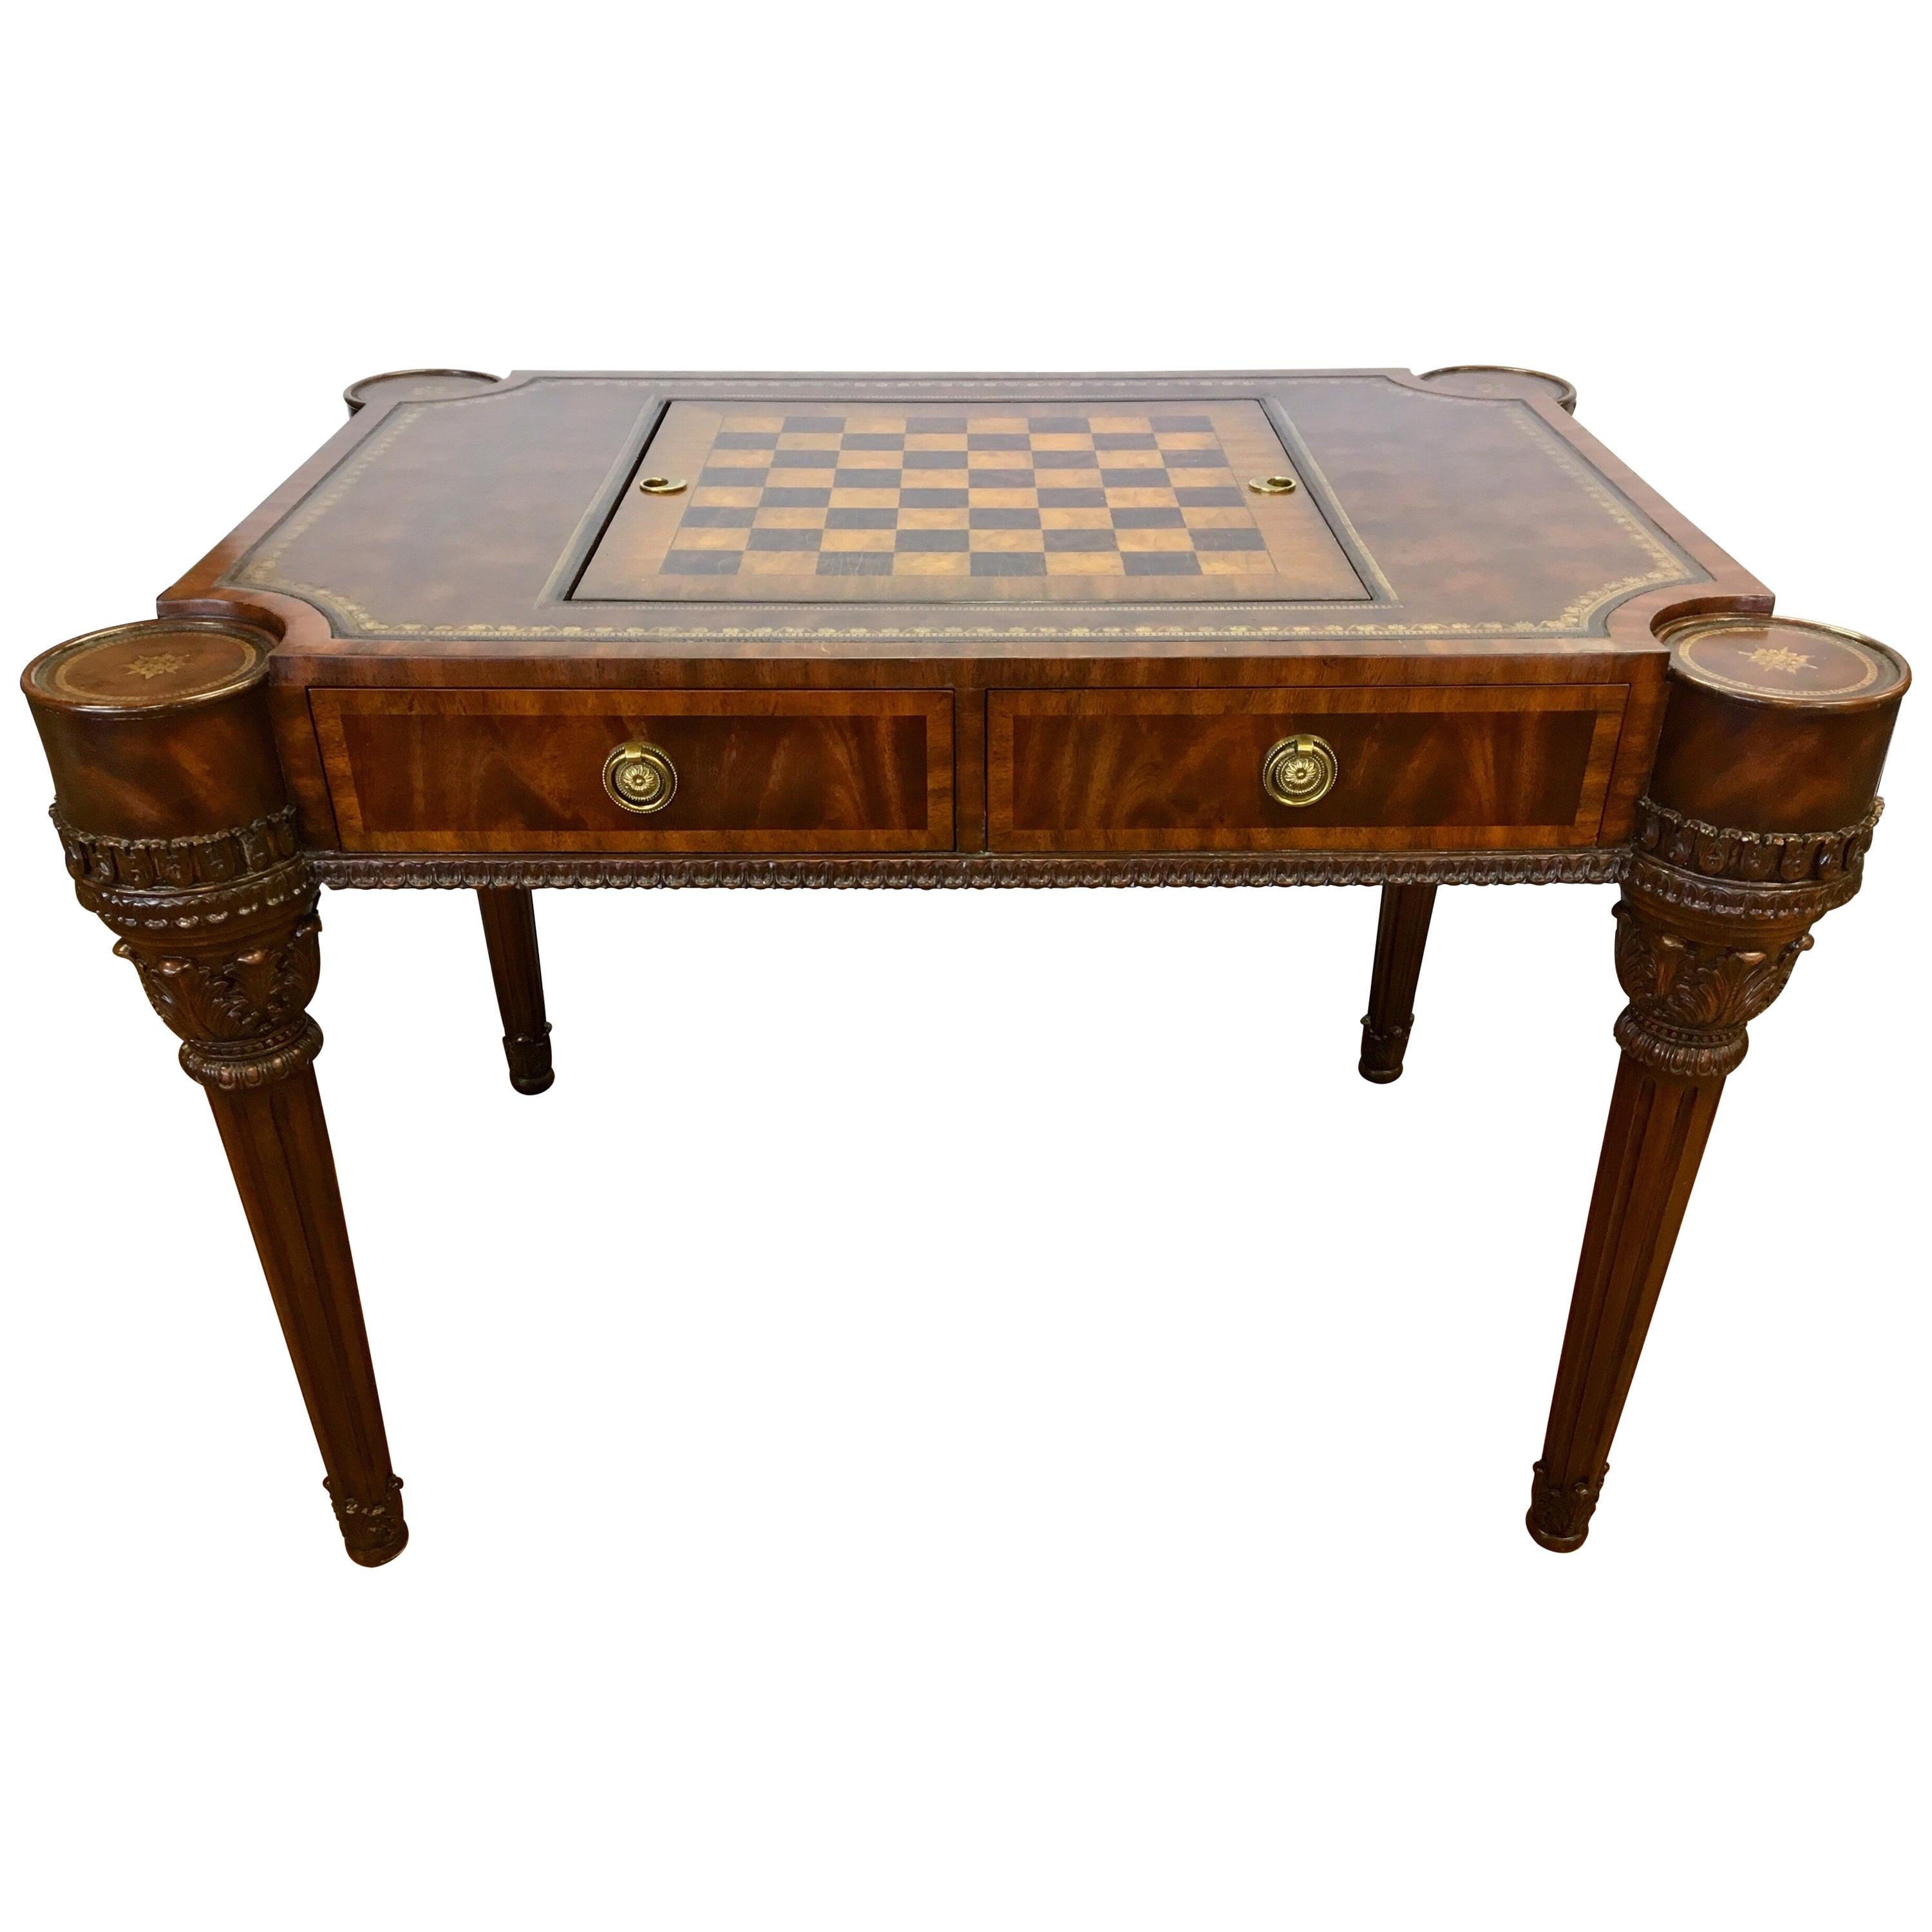 Maitland-Smith Carved Mahogany Game Table with Leather Top